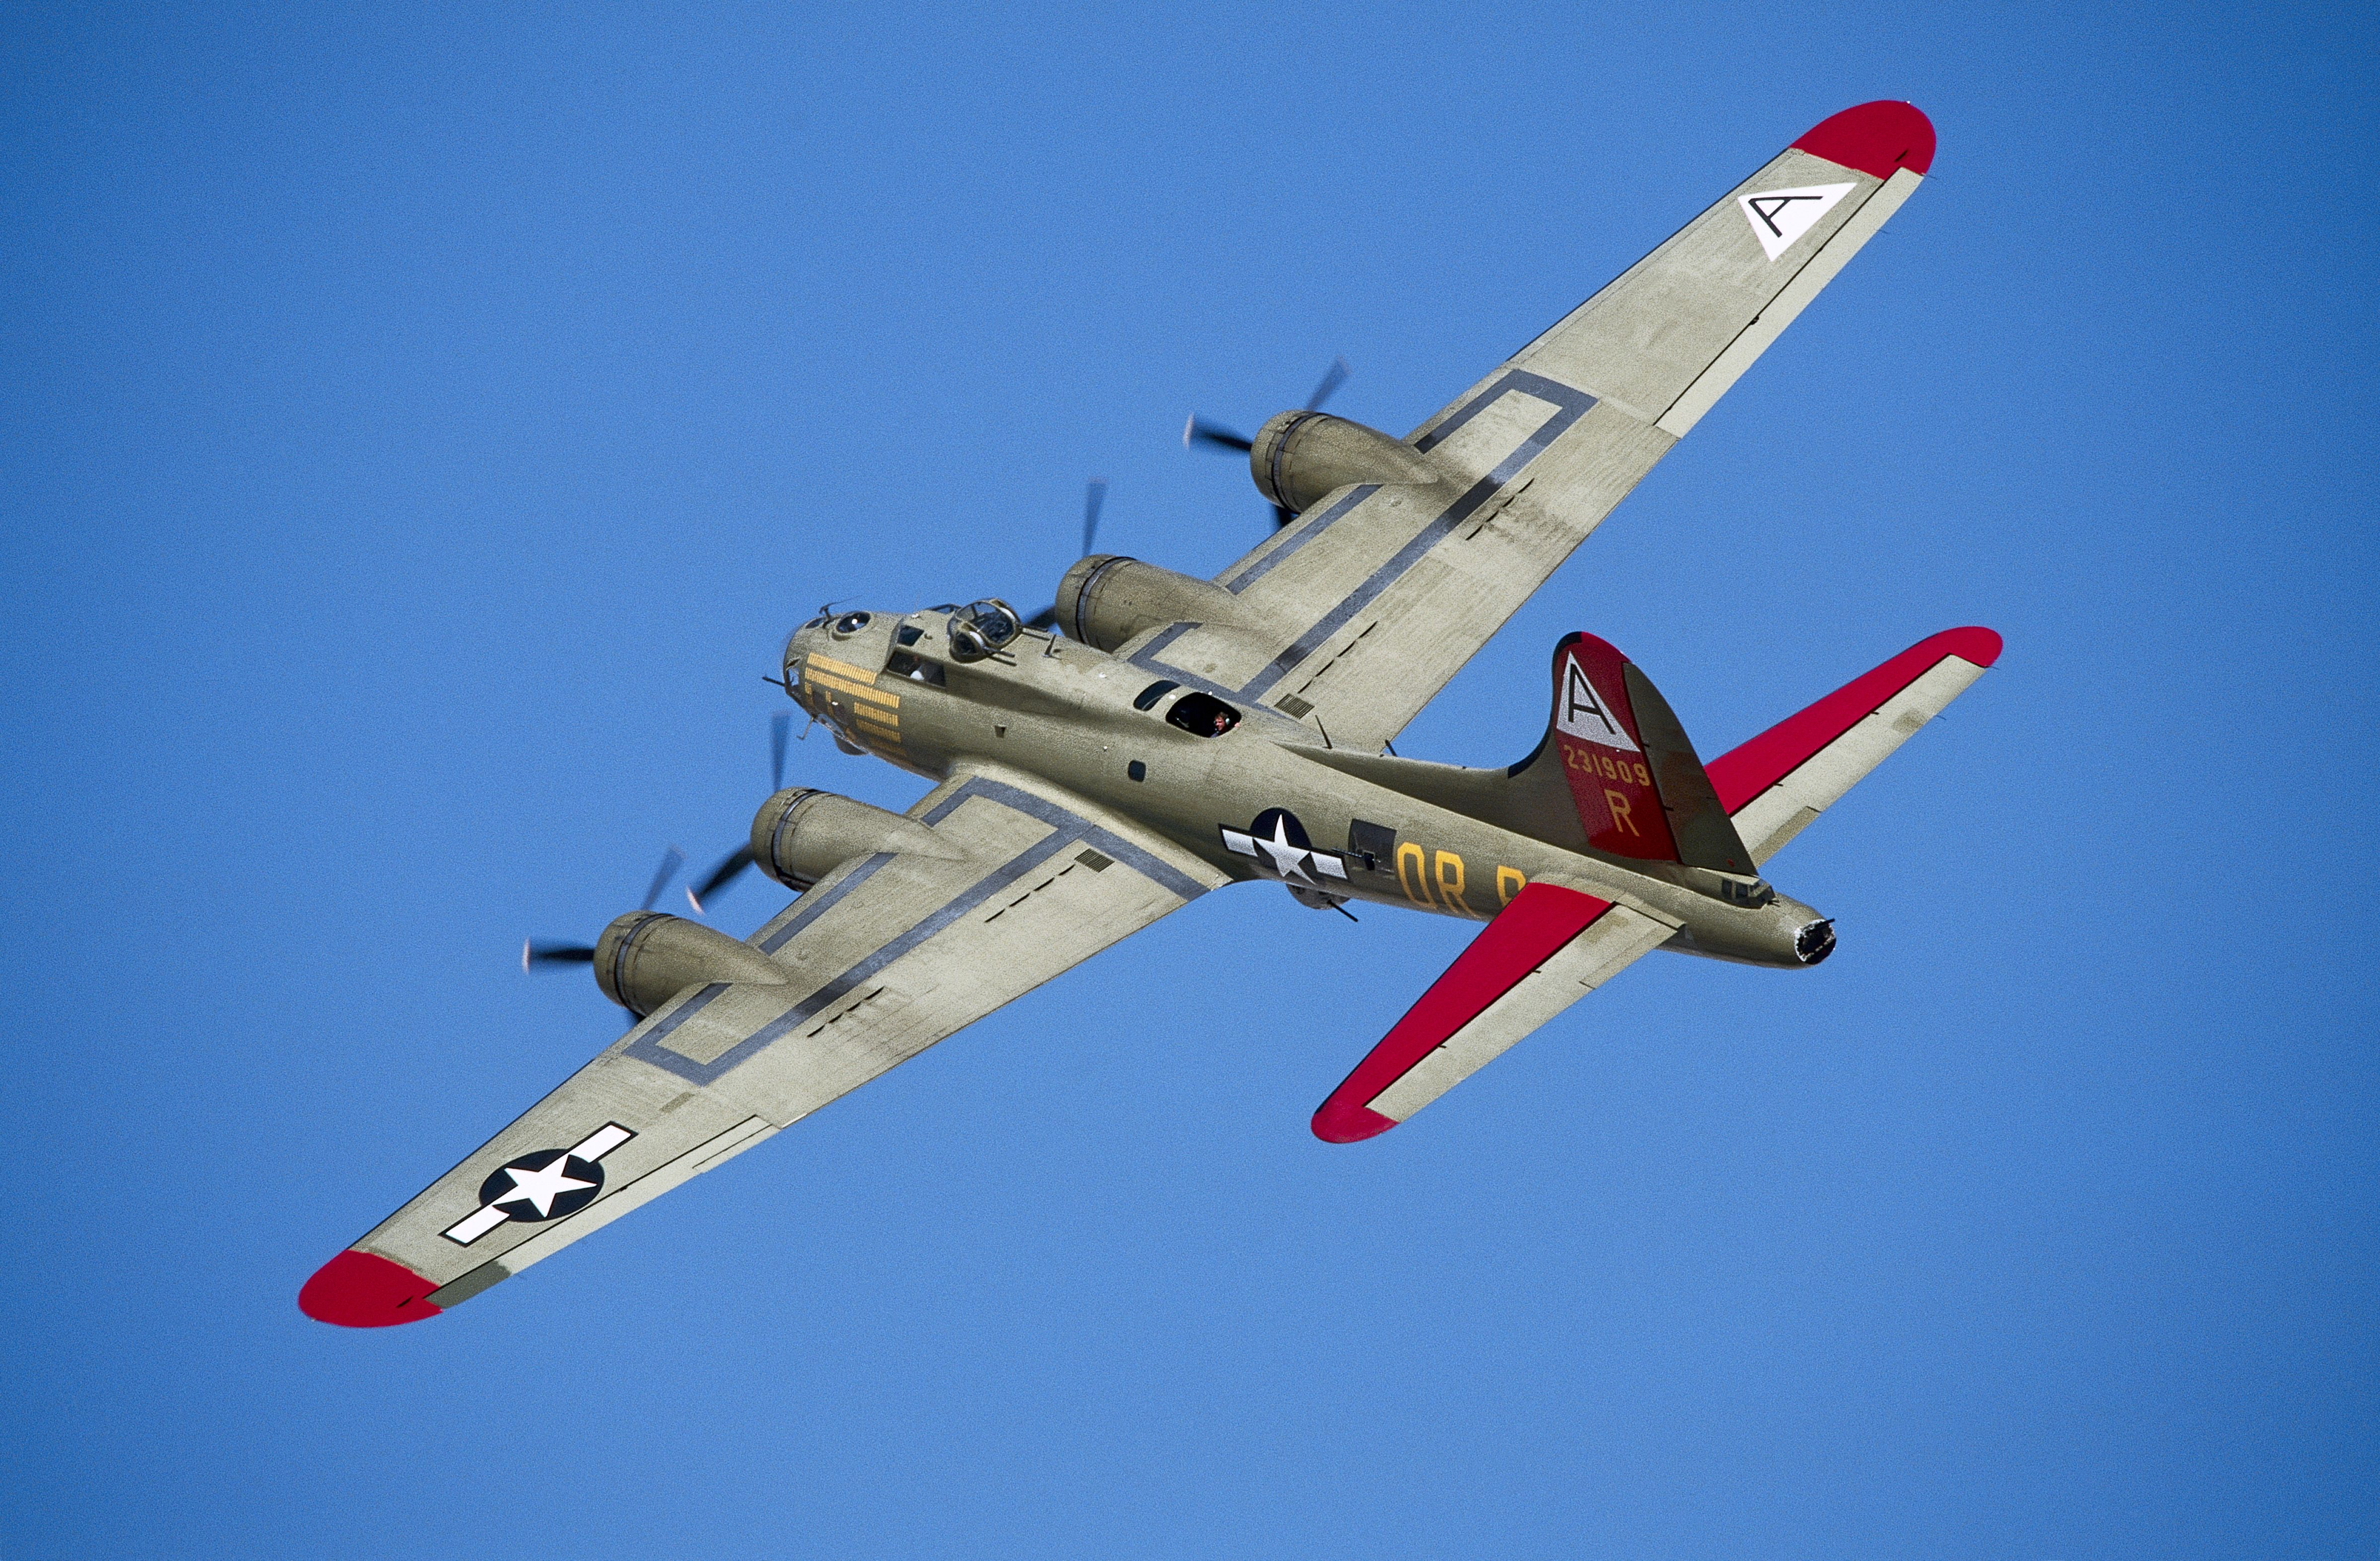 B-178 Flying Fortress